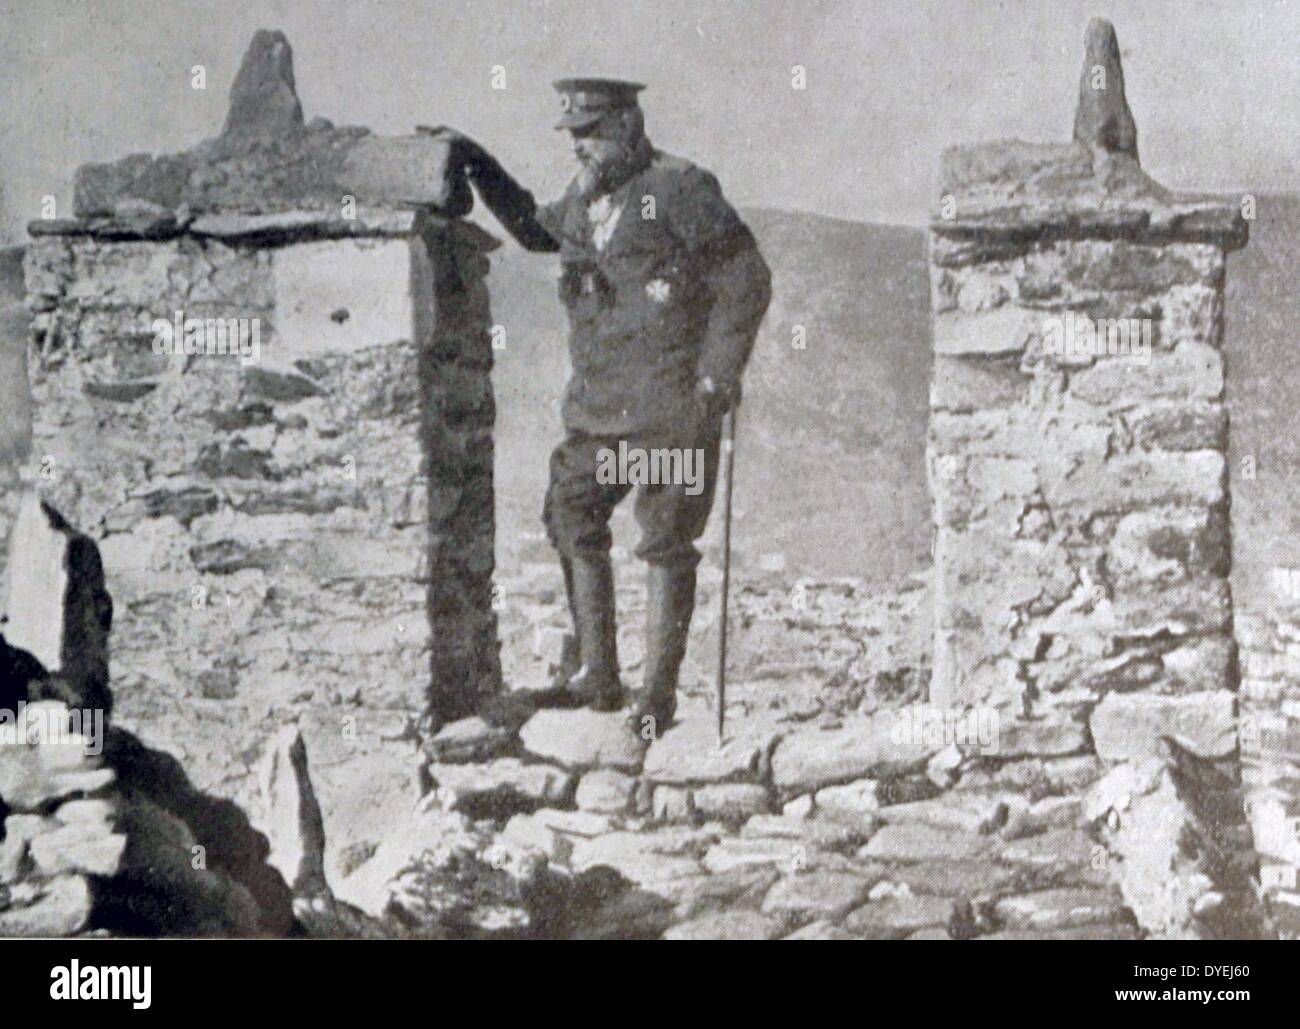 World War 1 - Tsar of the Bulgarians in December 1912 on the ruins of the fortress of Cavalla. World War I - Ferdinand I (26 February 1861 – 10 September 1948), On 5 October 1908 (celebrated on 22 September), Ferdinand proclaimed Bulgaria's de jure independence from the Ottoman Empire (though the country had been basically independent since 1878). He also elevated Bulgaria to the status of a kingdom, and proclaimed himself tsar, or king Stock Photo